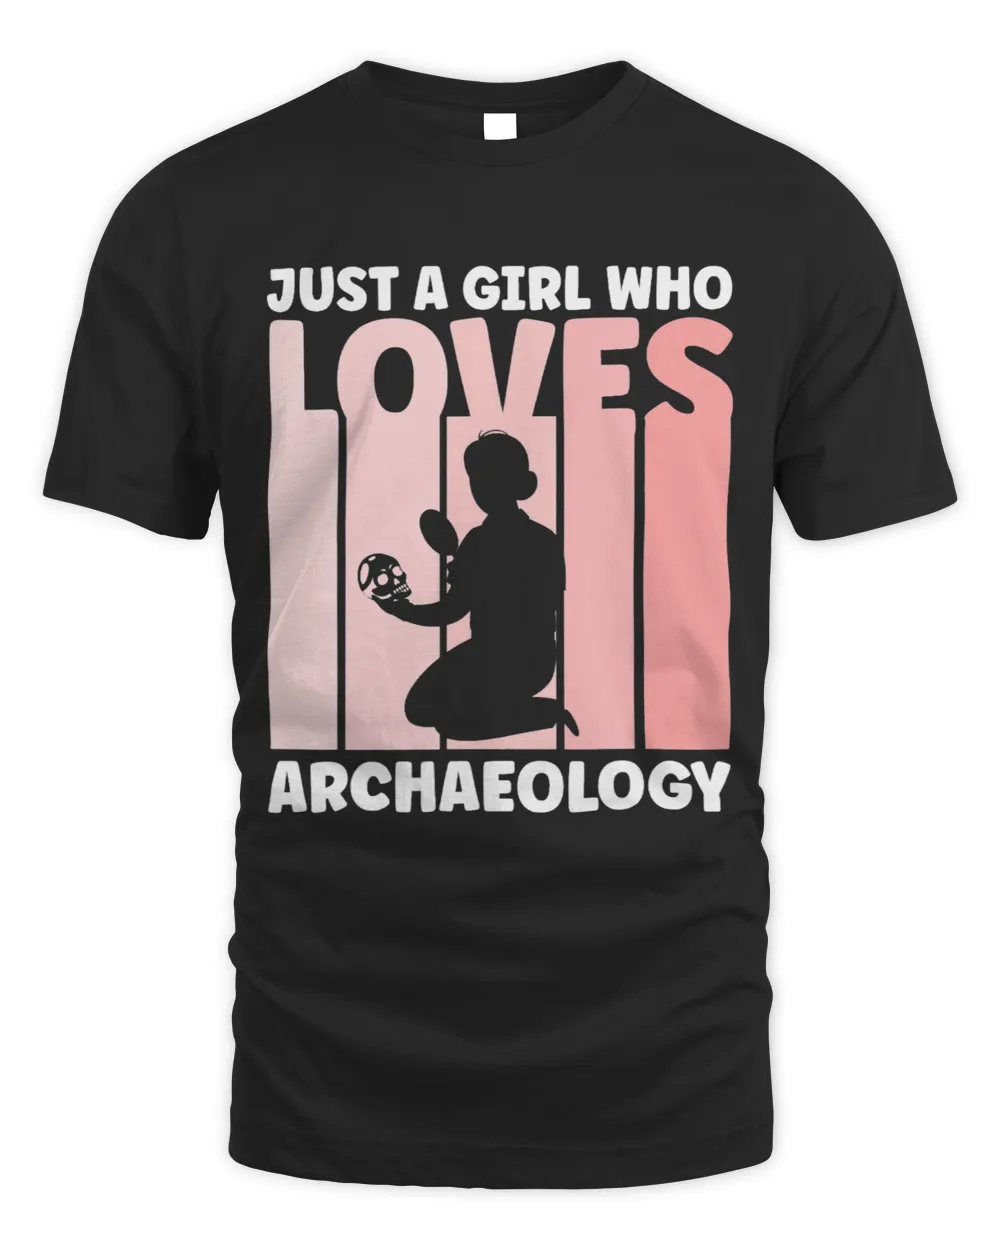 Archaeologist Apparel for Archaeology Lovers for Women 1